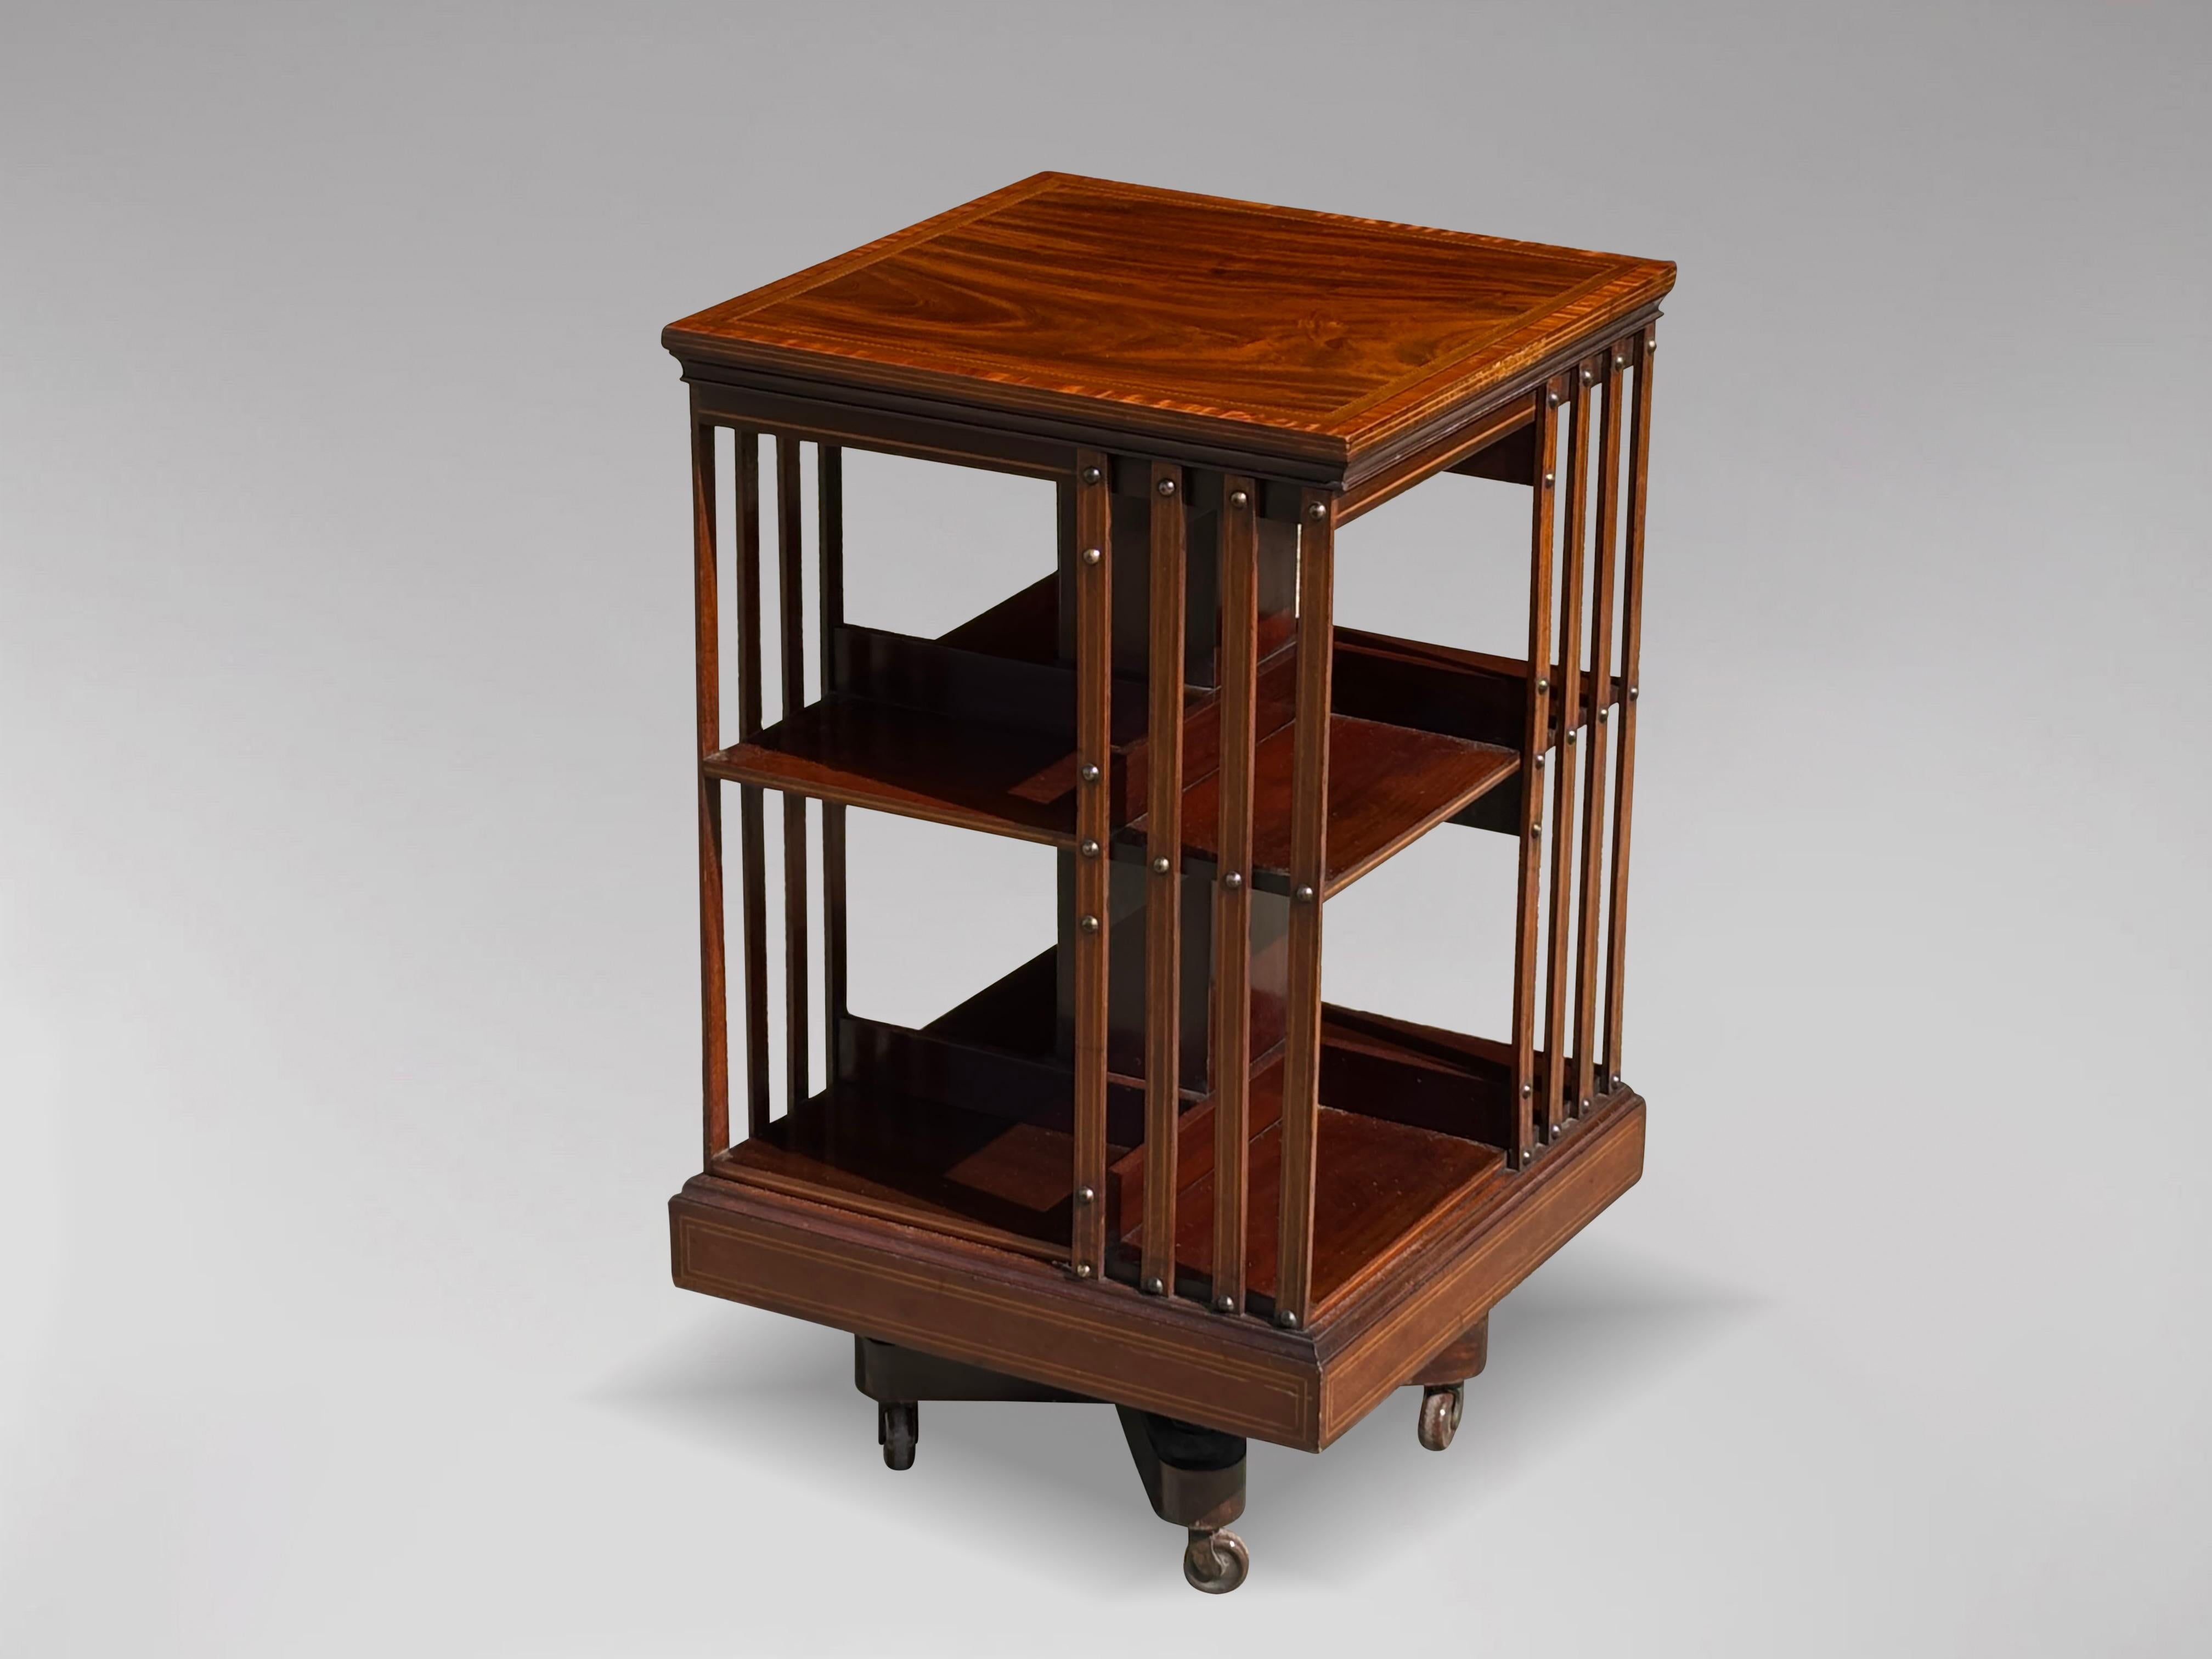 An attractive 19th century mahogany revolving bookcase with slatted sides, marquetry and crossbanded inlaid top, moulded edge, above two-tiered bookshelf with quarter sections divided by inlaid slats running from top to the base fastened with brass